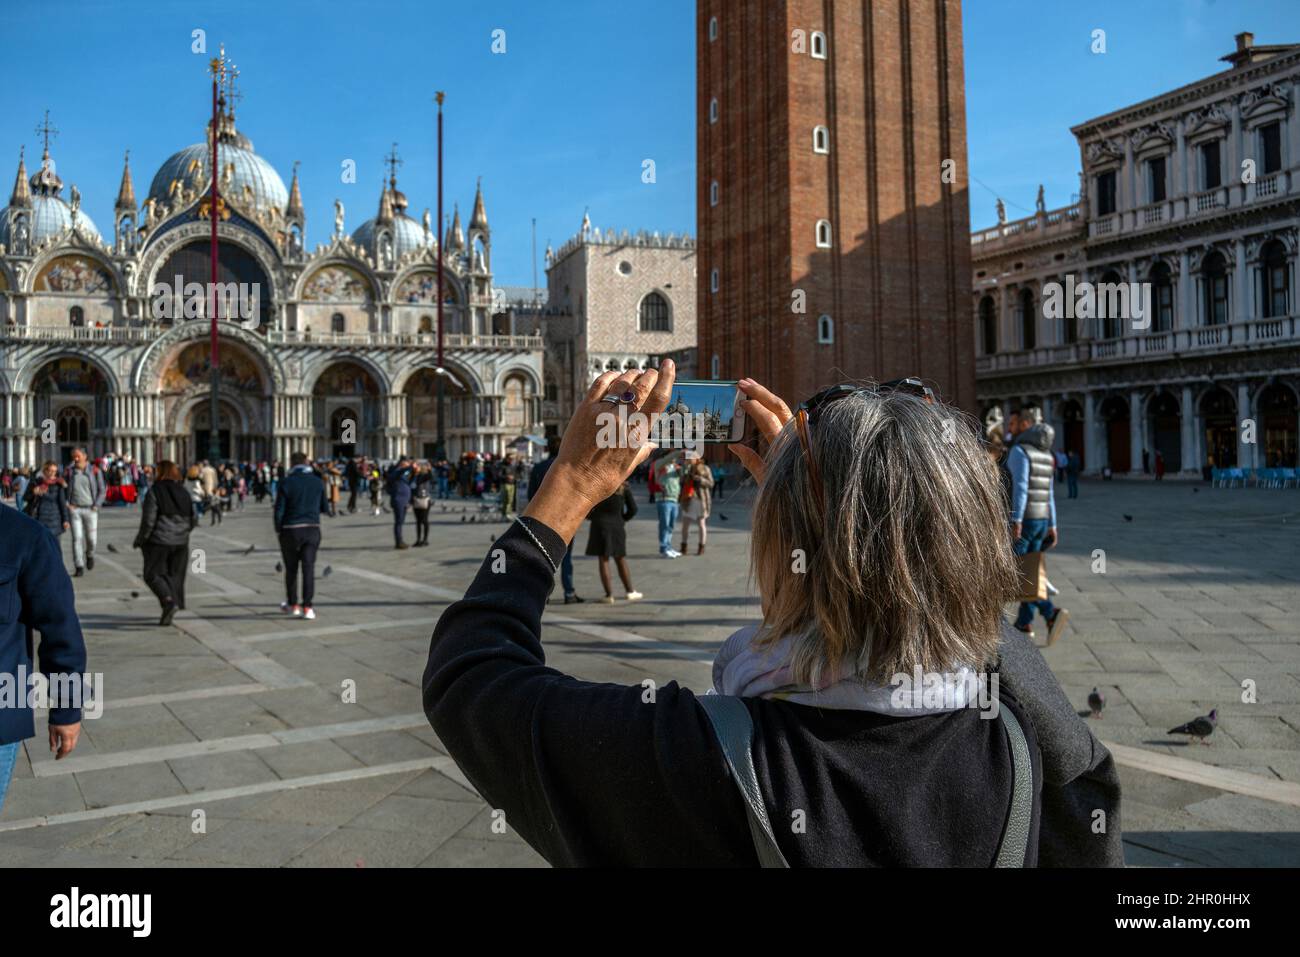 A rear view of a woman with iPhone, taking a shot of St Marks Basilica, St Marks square, Venice, Italy. Stock Photo